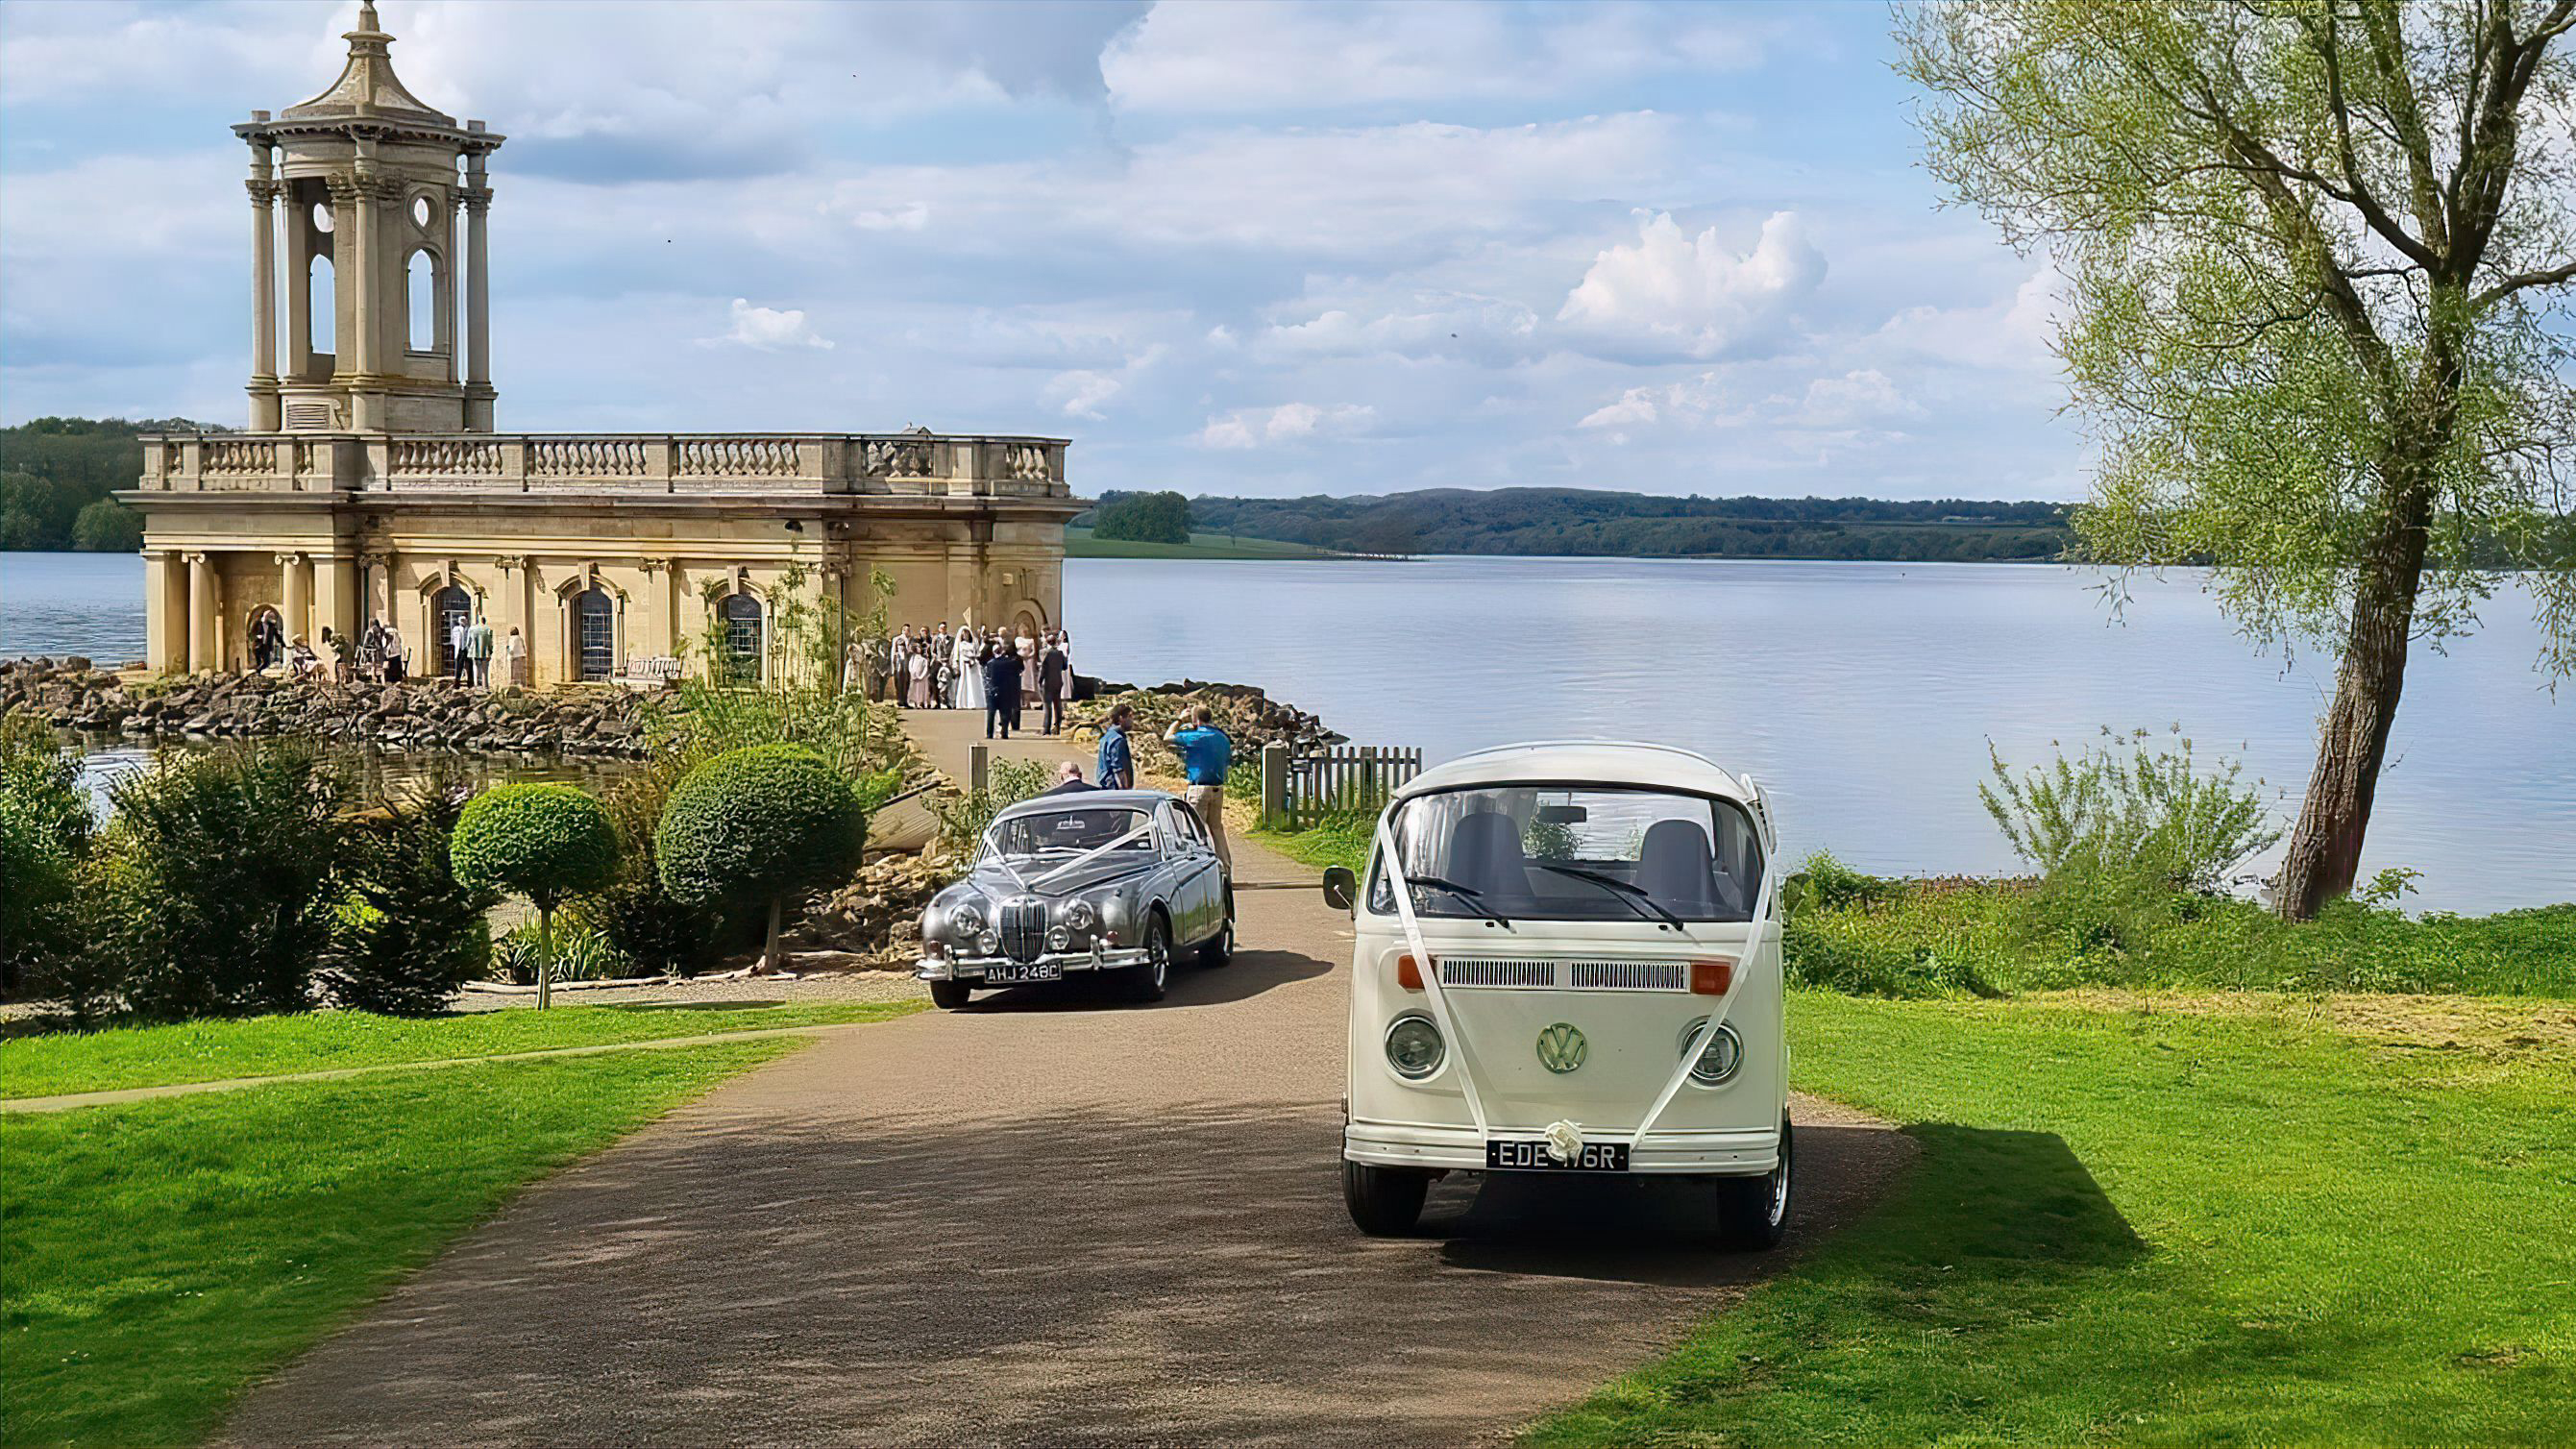 A classic VW campervan followed by a Jaguar Mk2 in front of Normanton Church near Leicestershire. Both vehicles are decorated with matching white ribbons. Wedding guests can be seen in the background.